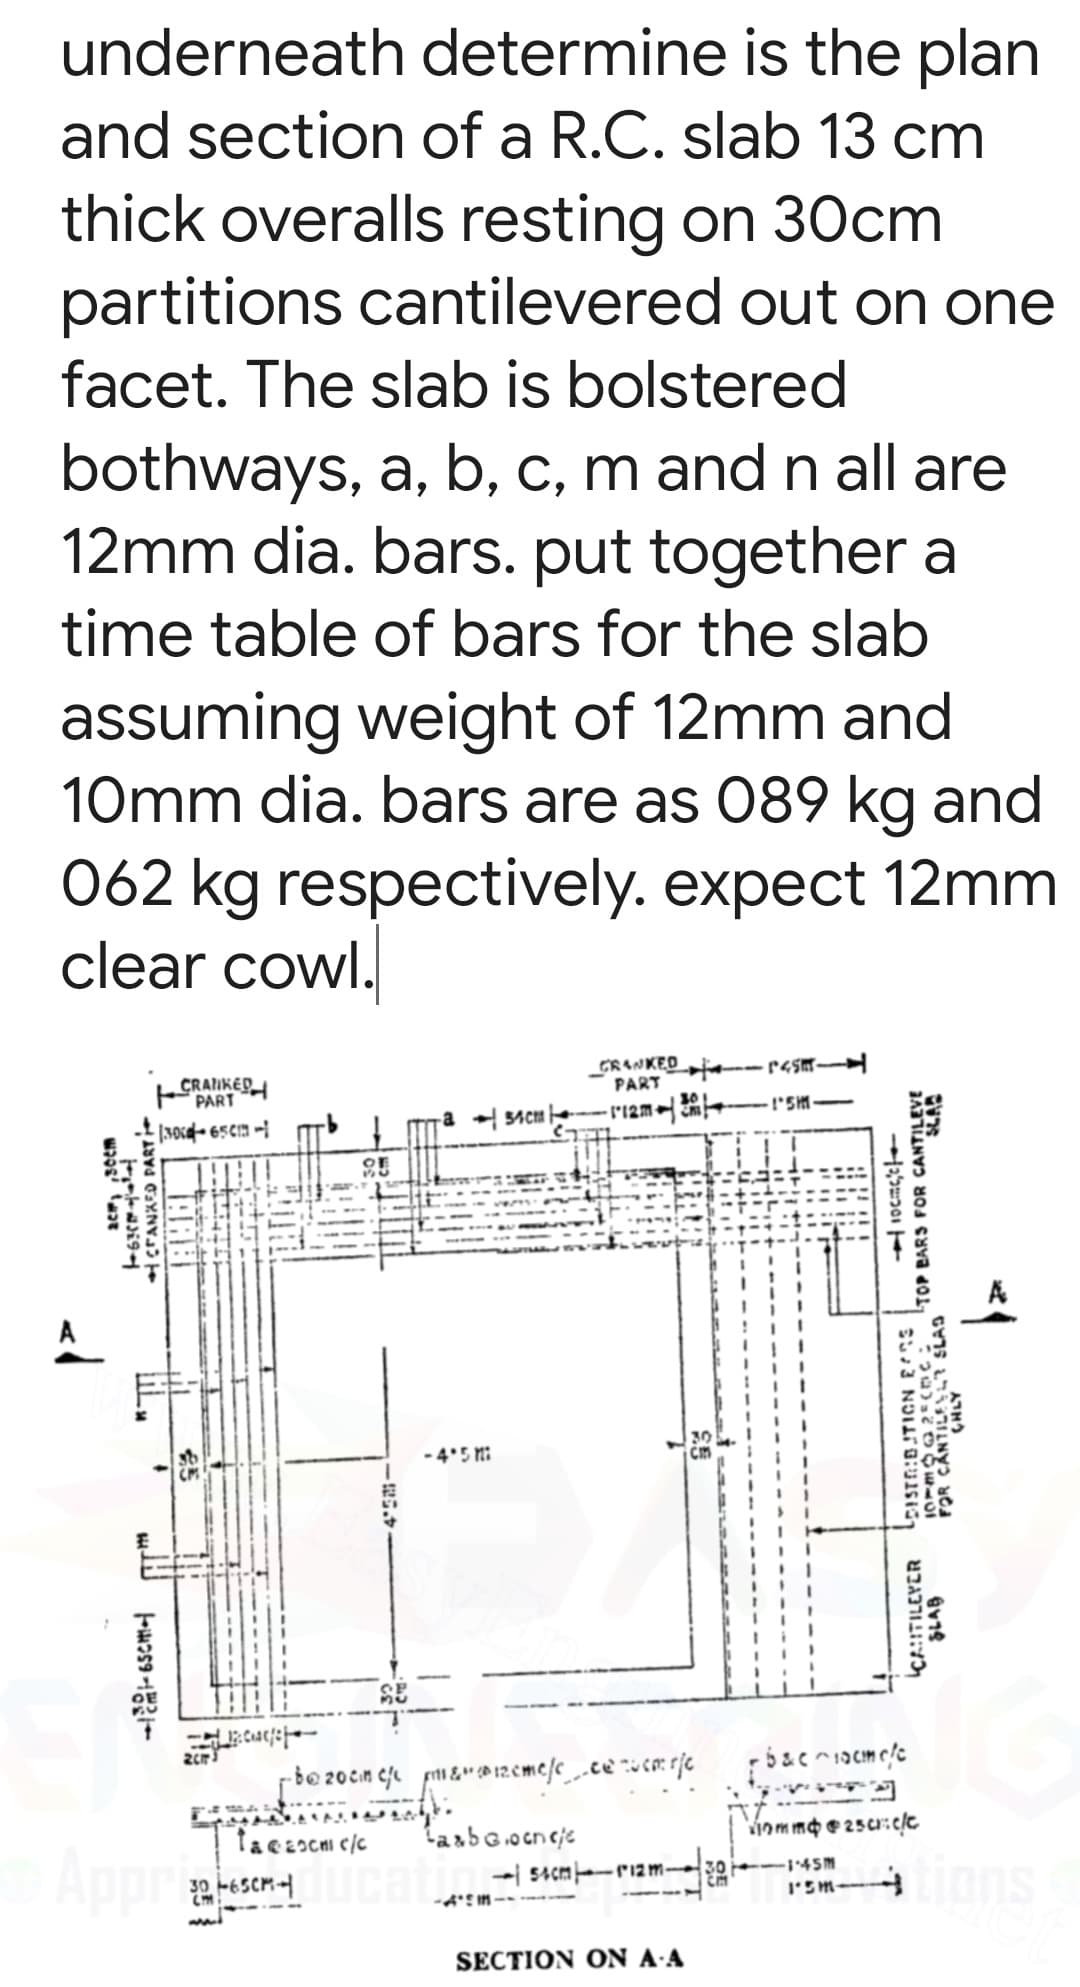 underneath determine is the plan
and section of a R.C. slab 13 cm
thick overalls resting on 30cm
partitions cantilevered out on one
facet. The slab is bolstered
bothways, a, b, c, m and n all are
12mm dia. bars. put together a
time table of bars for the slab
assuming weight of 12mm and
10mm dia. bars are as 089 kg and
062 kg respectively. expect 12mm
clear cowl.
acm 30cm
19
CRANKED PART
CRANKED
PART
1300-6501-1
Hwas 12
BAB
25
E
2cm3
CH
FEMAL
25
a
-4.5 M
54CM
TaeECHI C/C Laxb@.ocne/c
Approducat
30
GRANKED
PART
-112m2
[-be20cm c/c & 12cme/cce verje
30
54cm-12m-30
SECTION ON A A
·PESHT
15M
13,523011
bac^icmcfe
1.5M-
10-ma25cc TOP BARS FOR CANTILEVE
FOR CANTILESLY SLAD
CHLY
CANTILEVER DISTRIBUTION Ens
SLAB
Vimma @250: c/c
-1.45M
*
IS